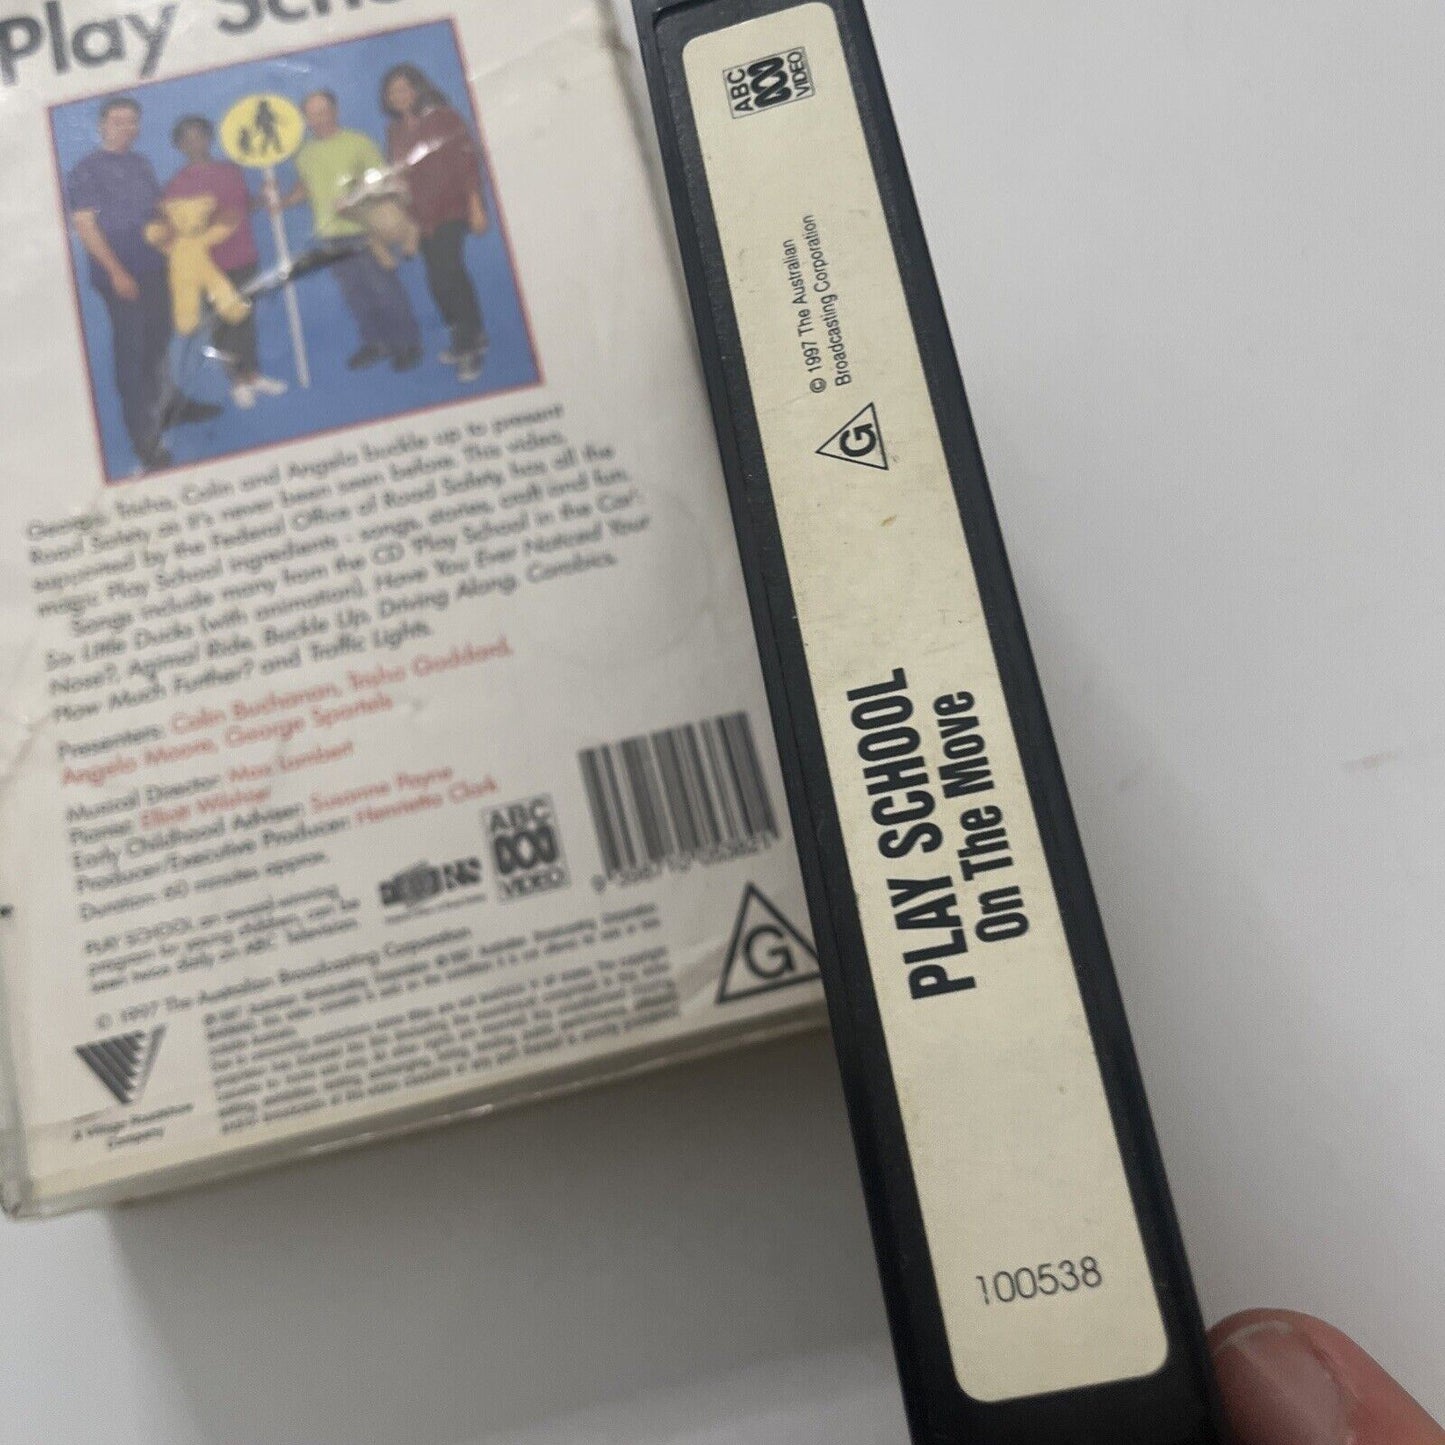 Play School - On The Move (VHS, 1997) ABC Video PAL